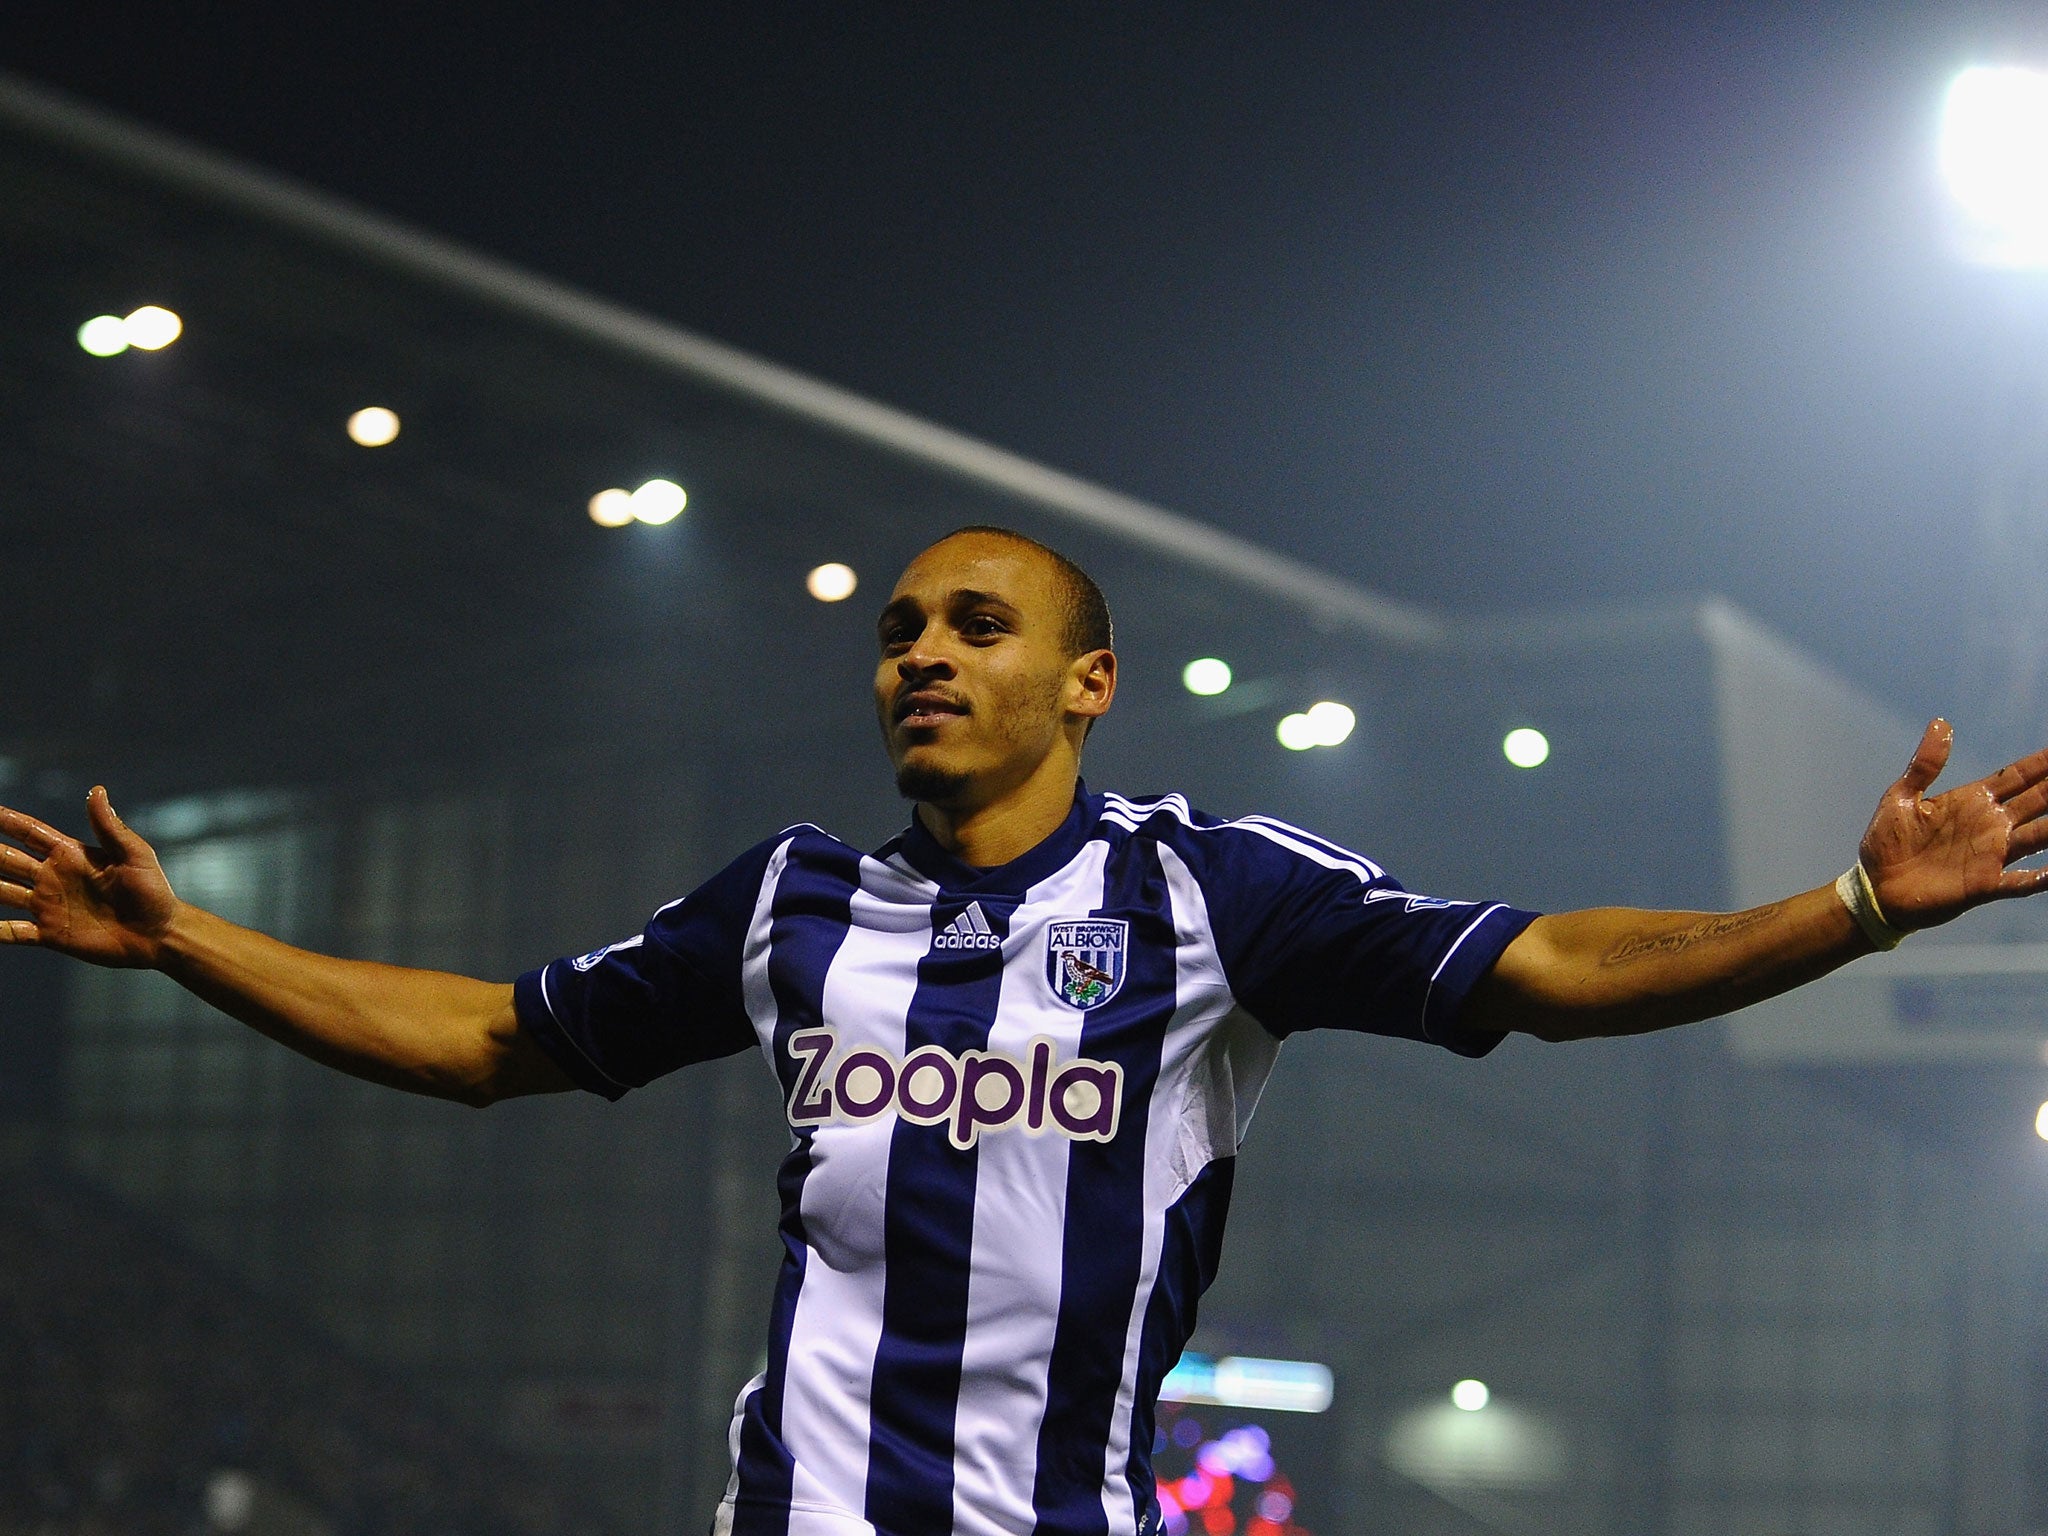 West Bromwich Albion disappointed with 'unprofessional' Peter Odemwingie, The Independent